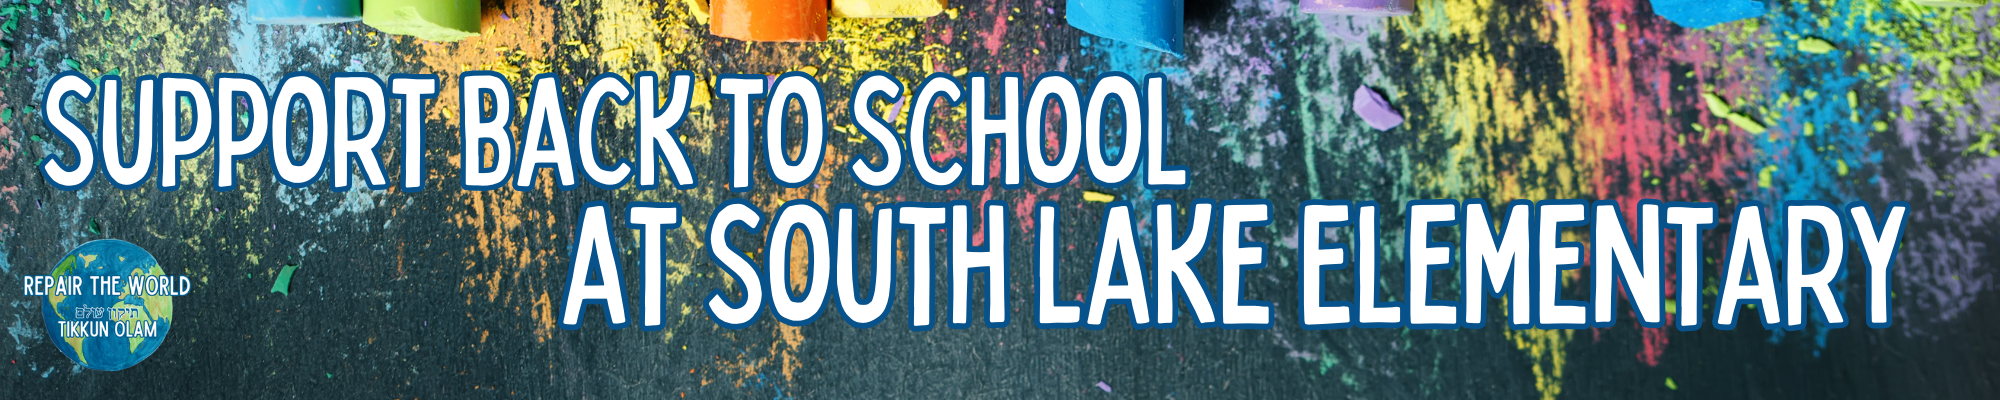 Support Back to School at South lake Elementary